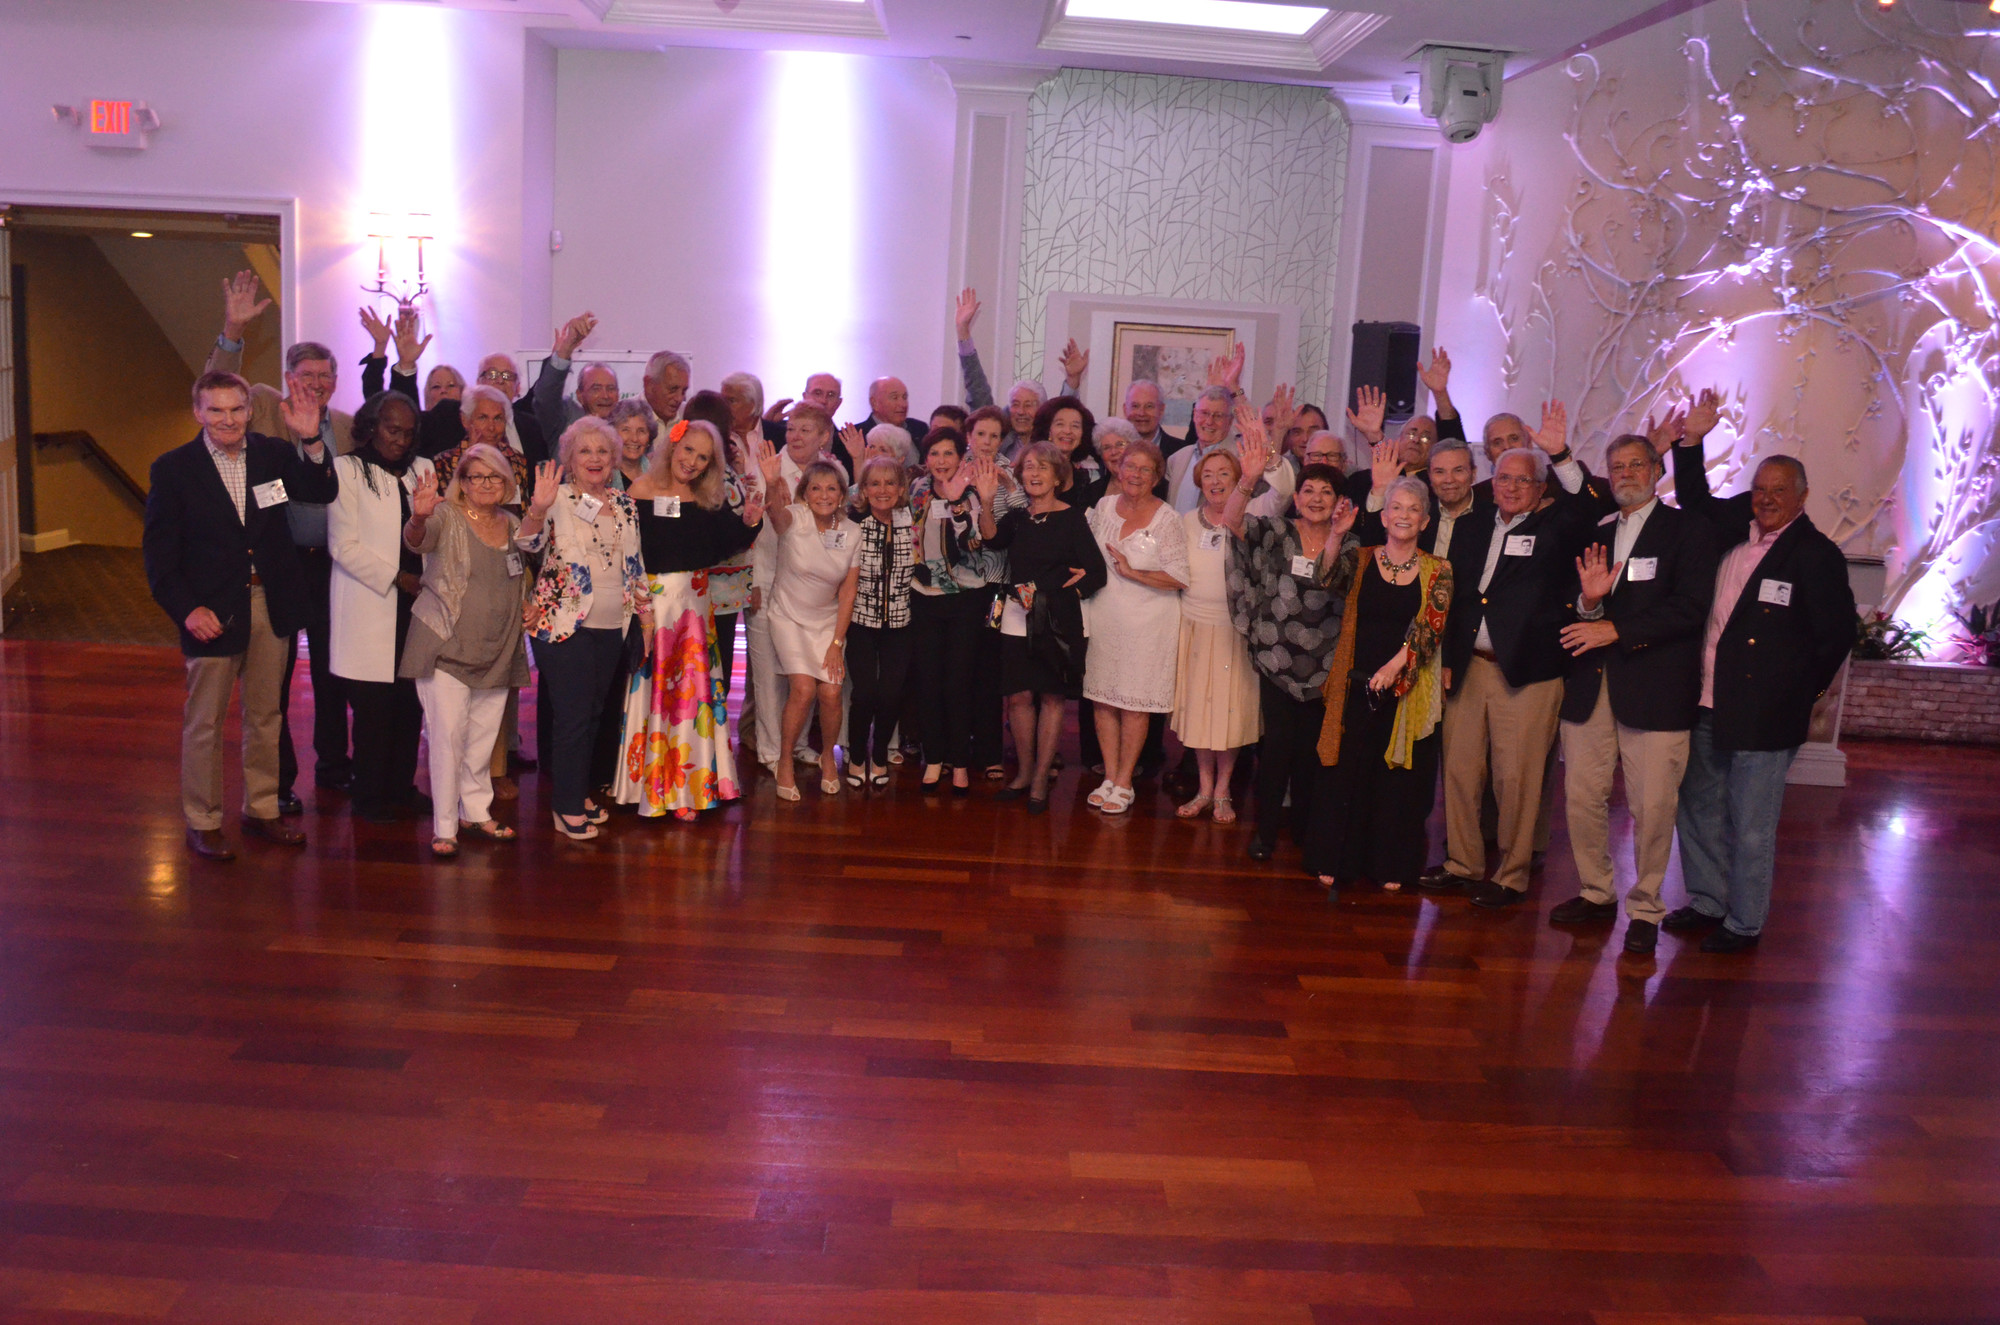 Members of the class of 1955 came from all over the country to celebrate their 60th high school reunion.